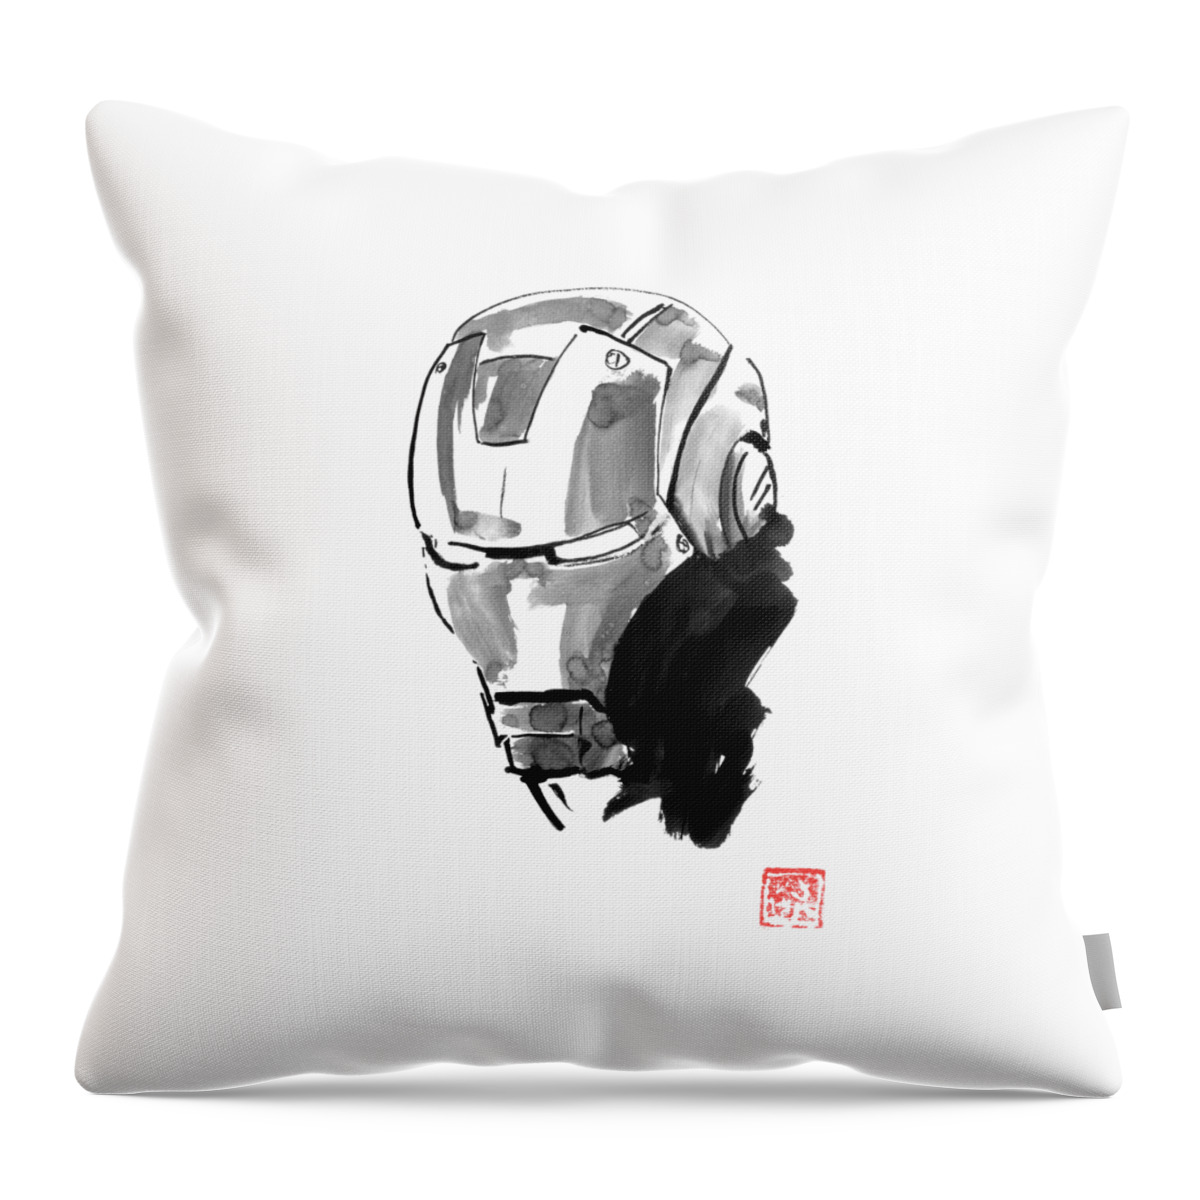 Ironman Throw Pillow featuring the drawing Ironlman 05 by Pechane Sumie